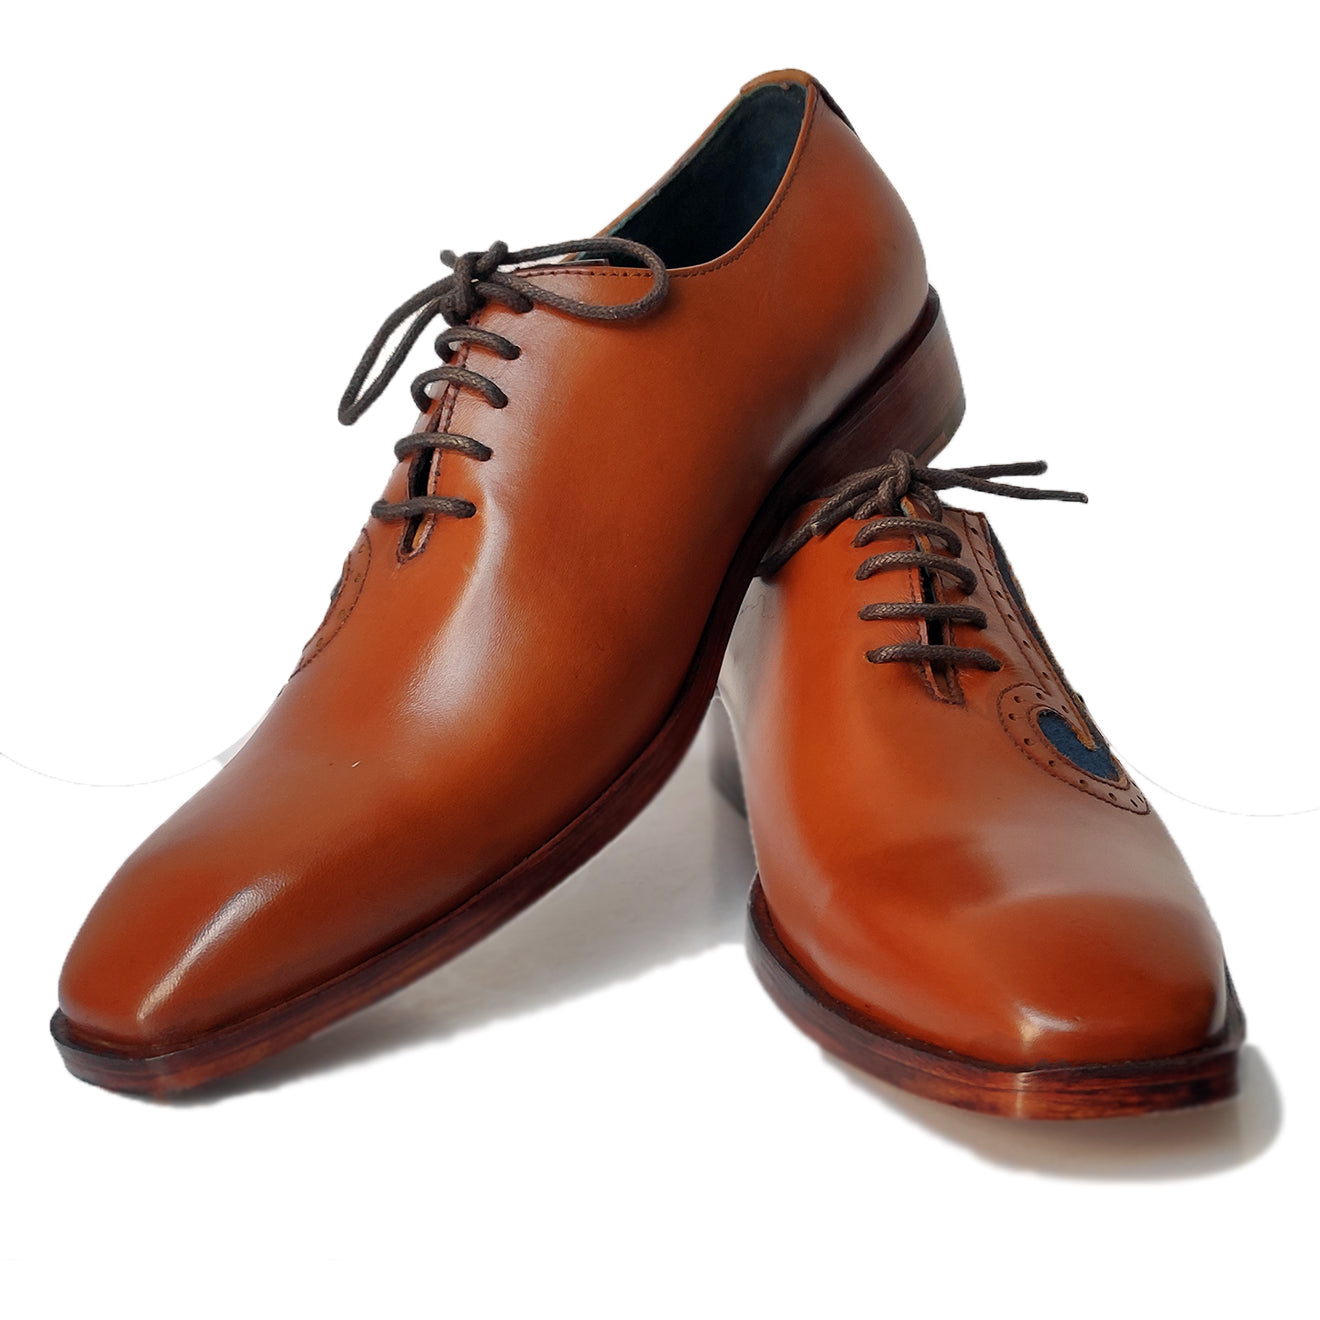 Johny Weber Handmade Two Tone Tan Leather Oxford Shoes